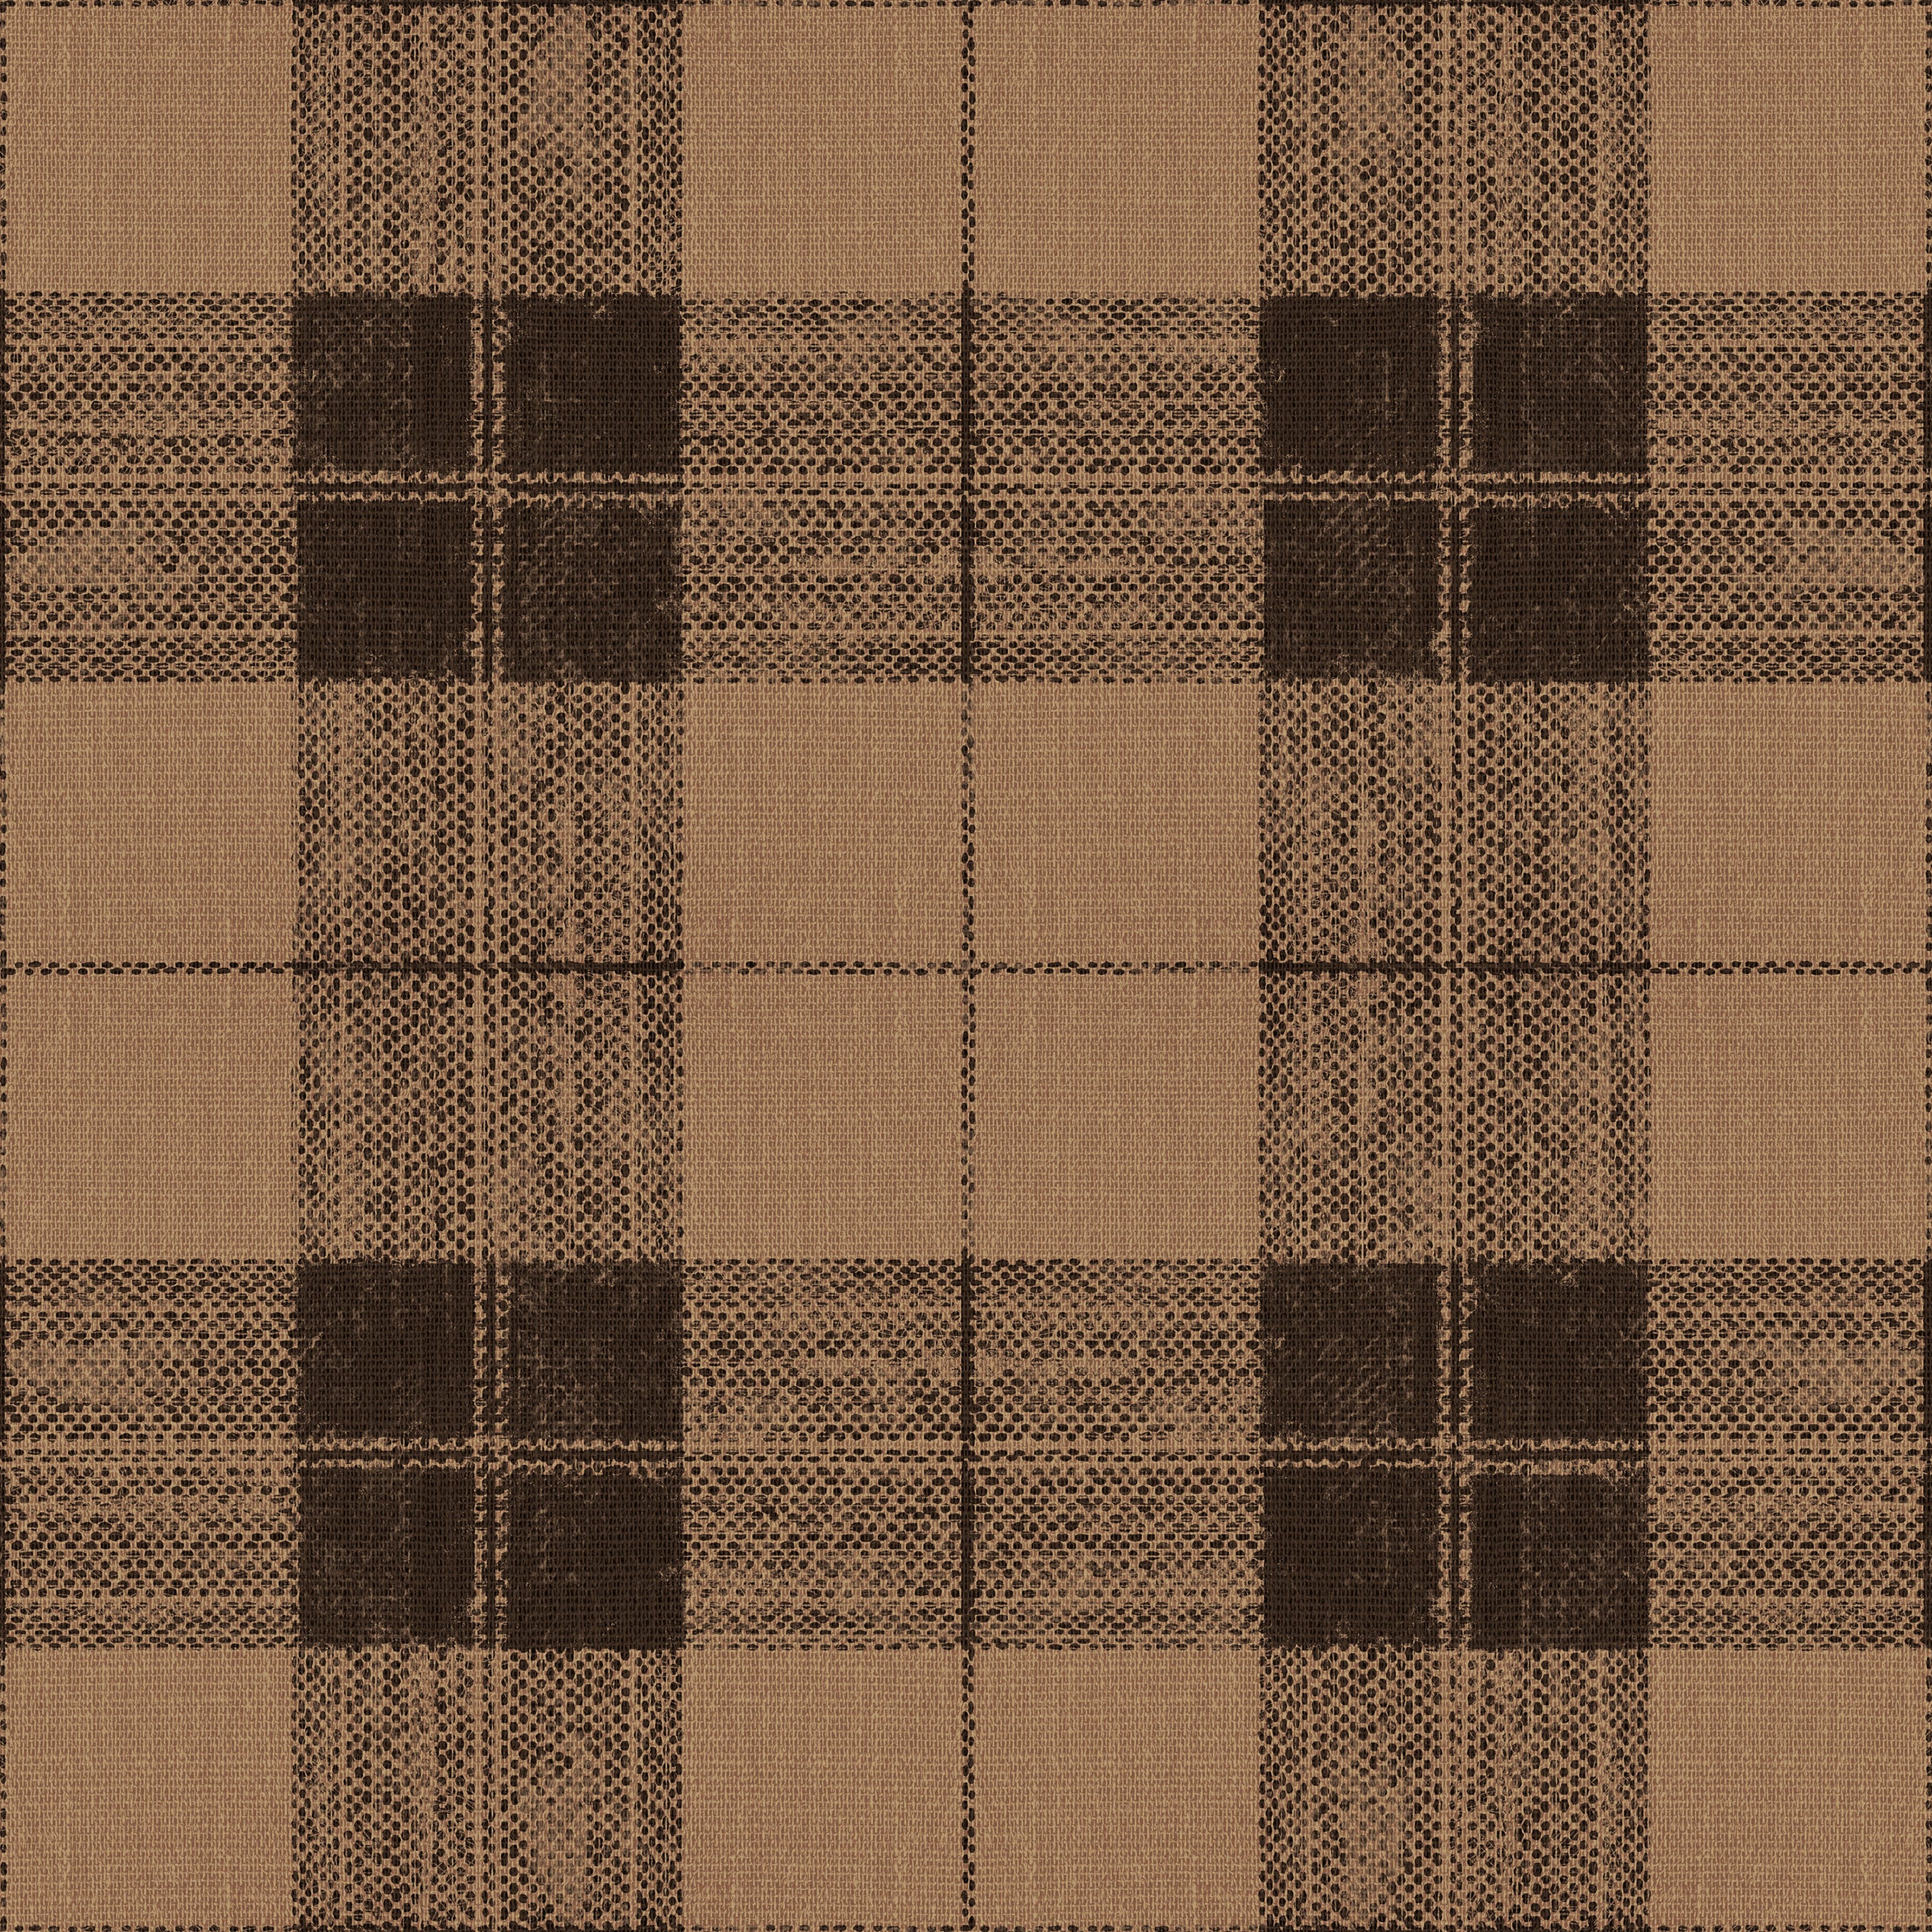 A seamless pattern of Four Square wallpaper featuring a classic checkered design in tan and black hues. The grid pattern showcases intersecting lines of black and tan, creating a bold and sophisticated look. The texture adds depth and richness to the design.